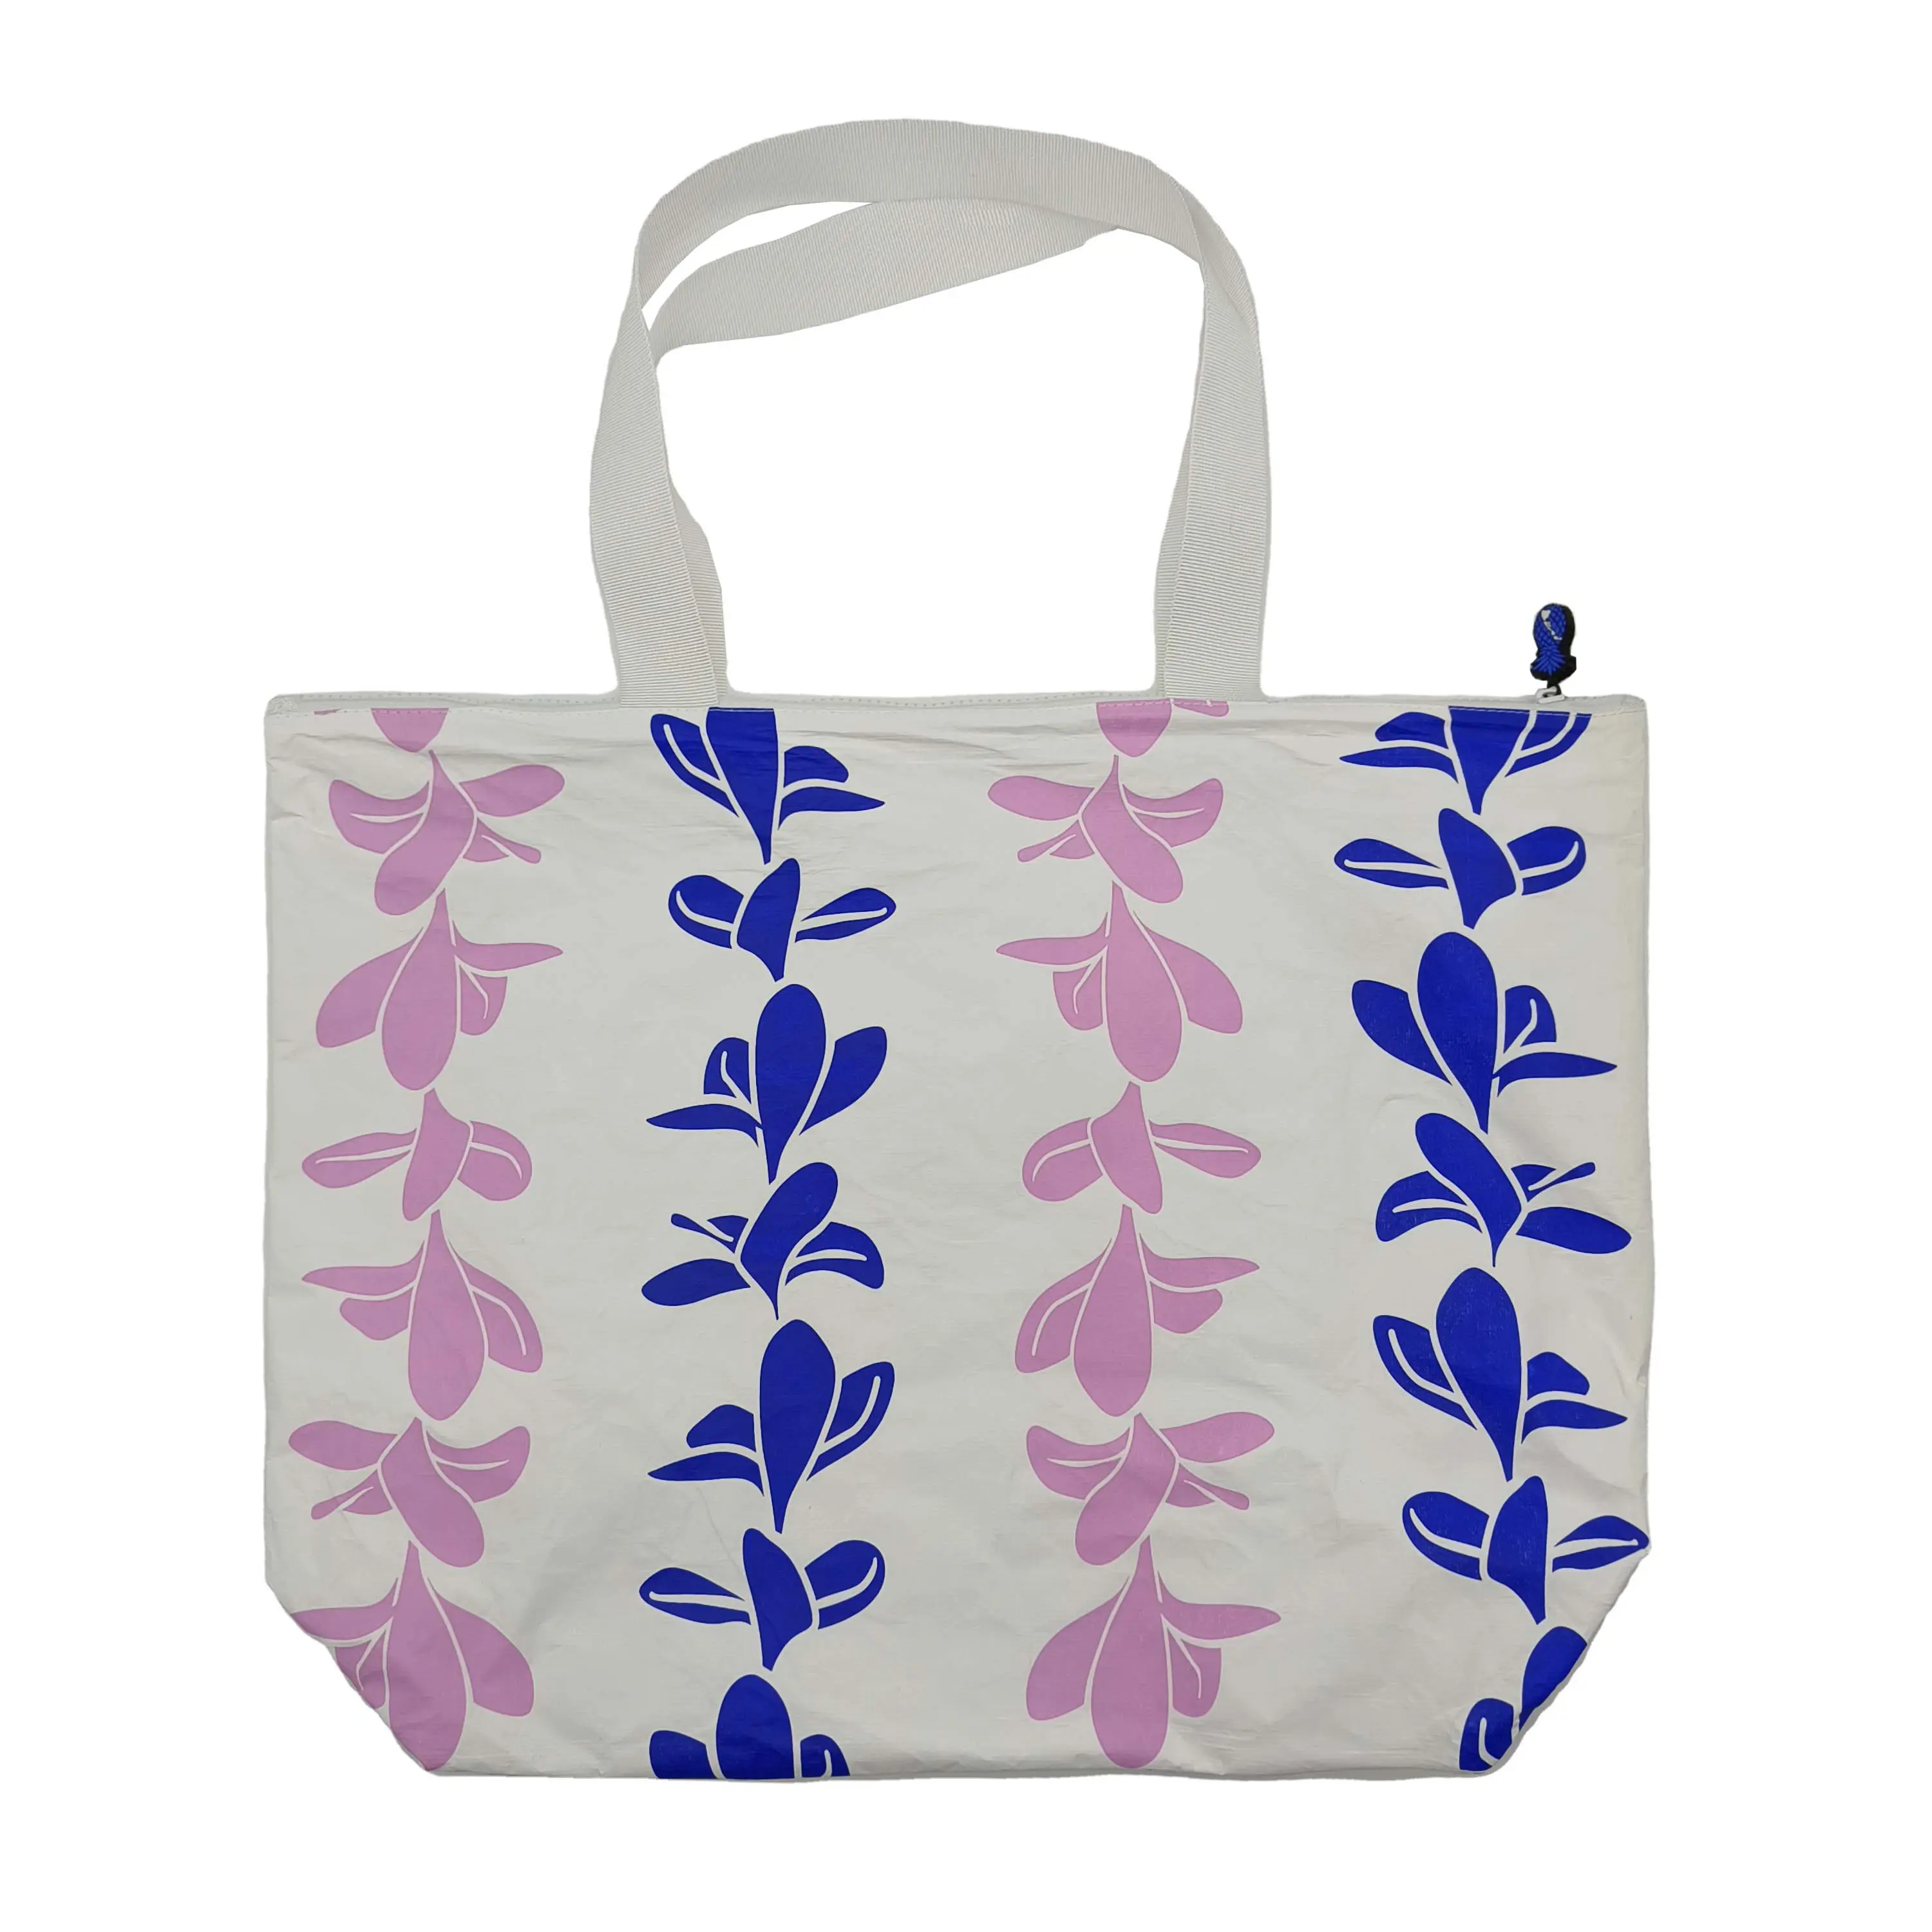 Latest New Design Superior Durability Blue Pink Flowers Pattern Big Tote Tyvek Dupont Bag